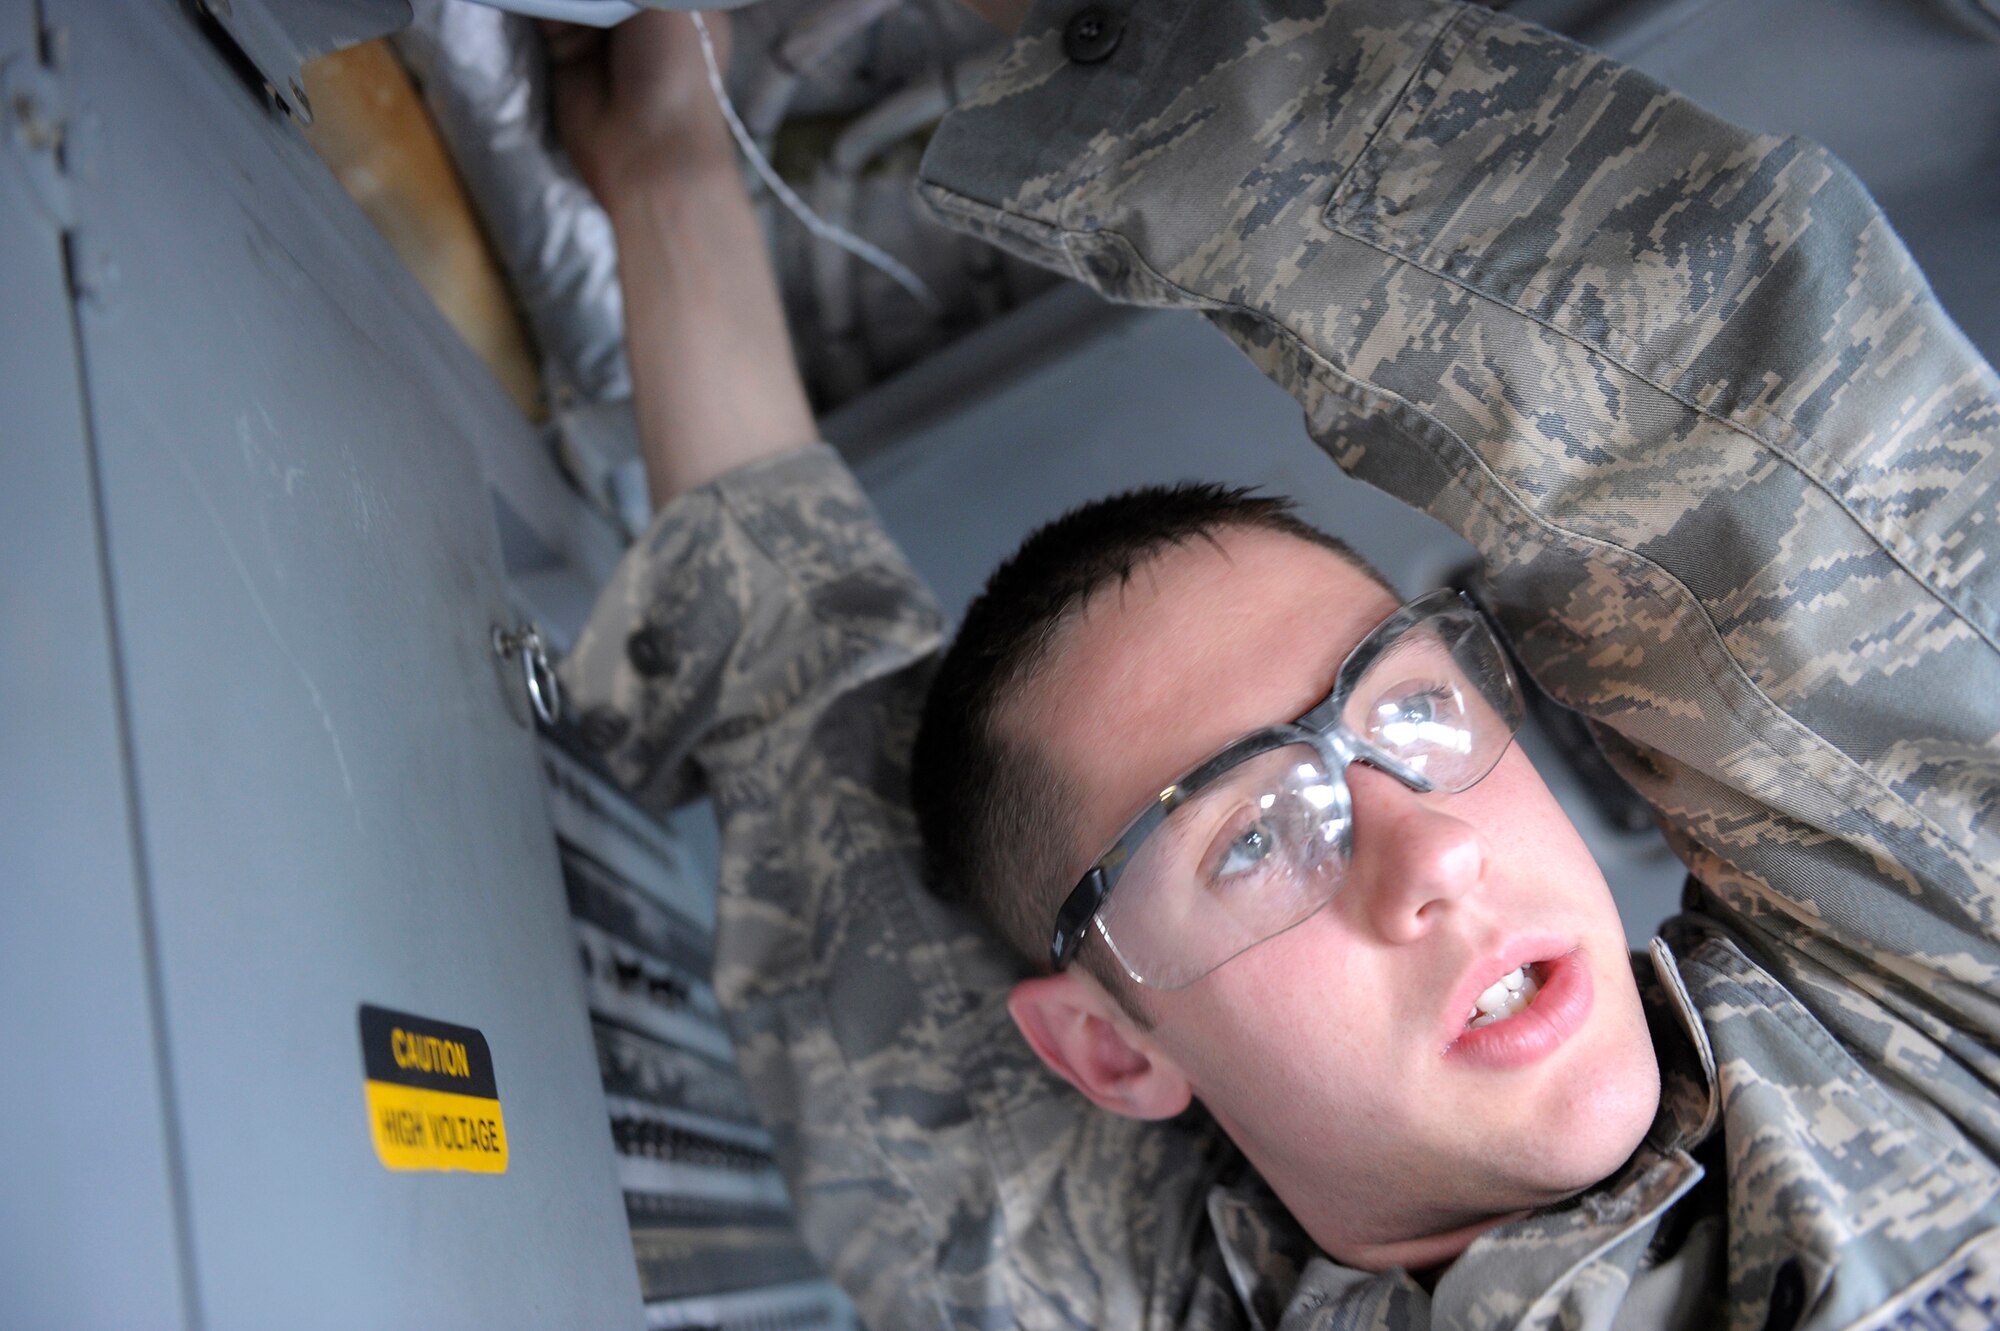 ELMENDORF AIR FORCE BASE, Alaska -- Senior Airman Michael Koch works on a C-17 Globemaster III June 29. Koch is part of an 11-man crew that is preparing for the Air Mobility Command Rodeo at McChord Air Force Base, Wash., July 18-26. (U.S. Air Force photo/Master Sgt. Keith Brown)